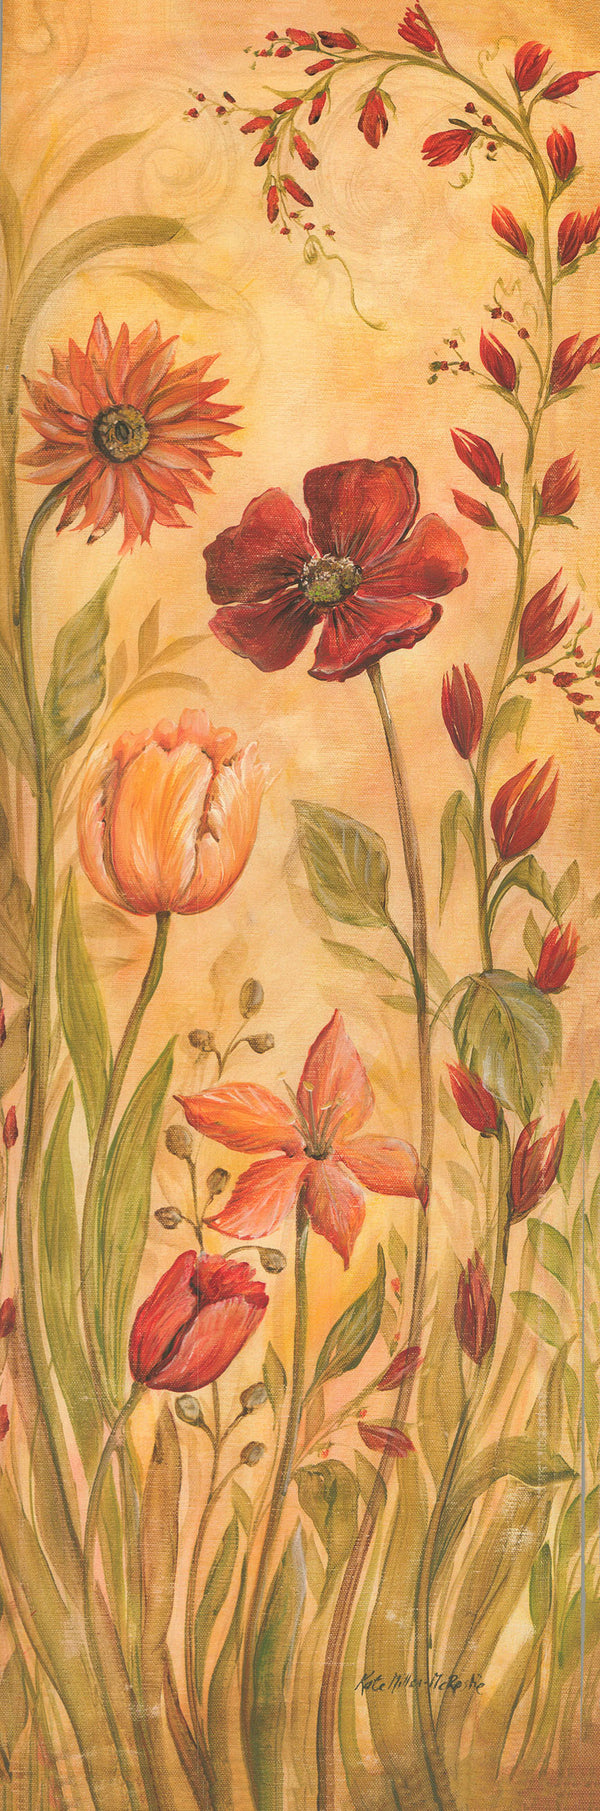 Floral Tapestry II by Kate McRostie - 12 X 36 Inches (Art Print)